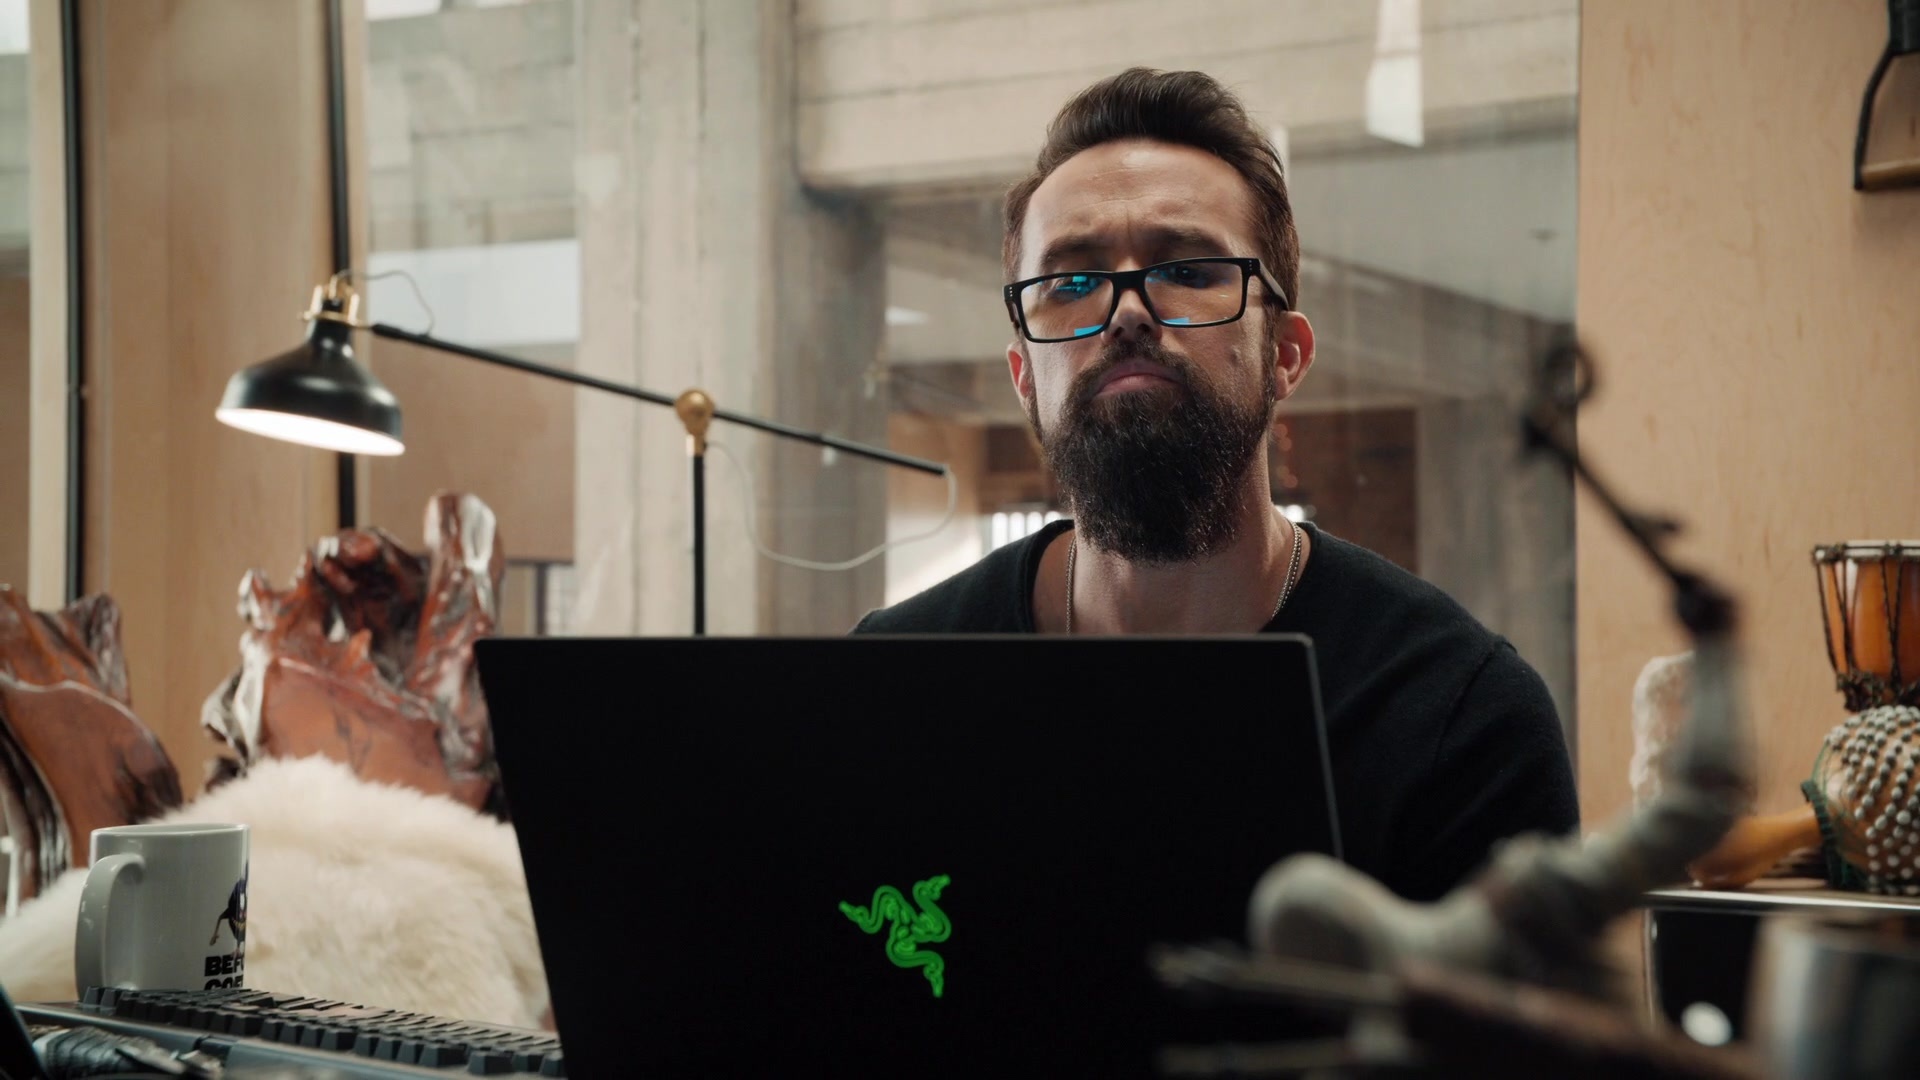 Razer Laptop Computer Used By Rob McElhenney As Ian Grimm In Mythic Quest: Raven's Banquet Season 1 Episode 3 1920x1080